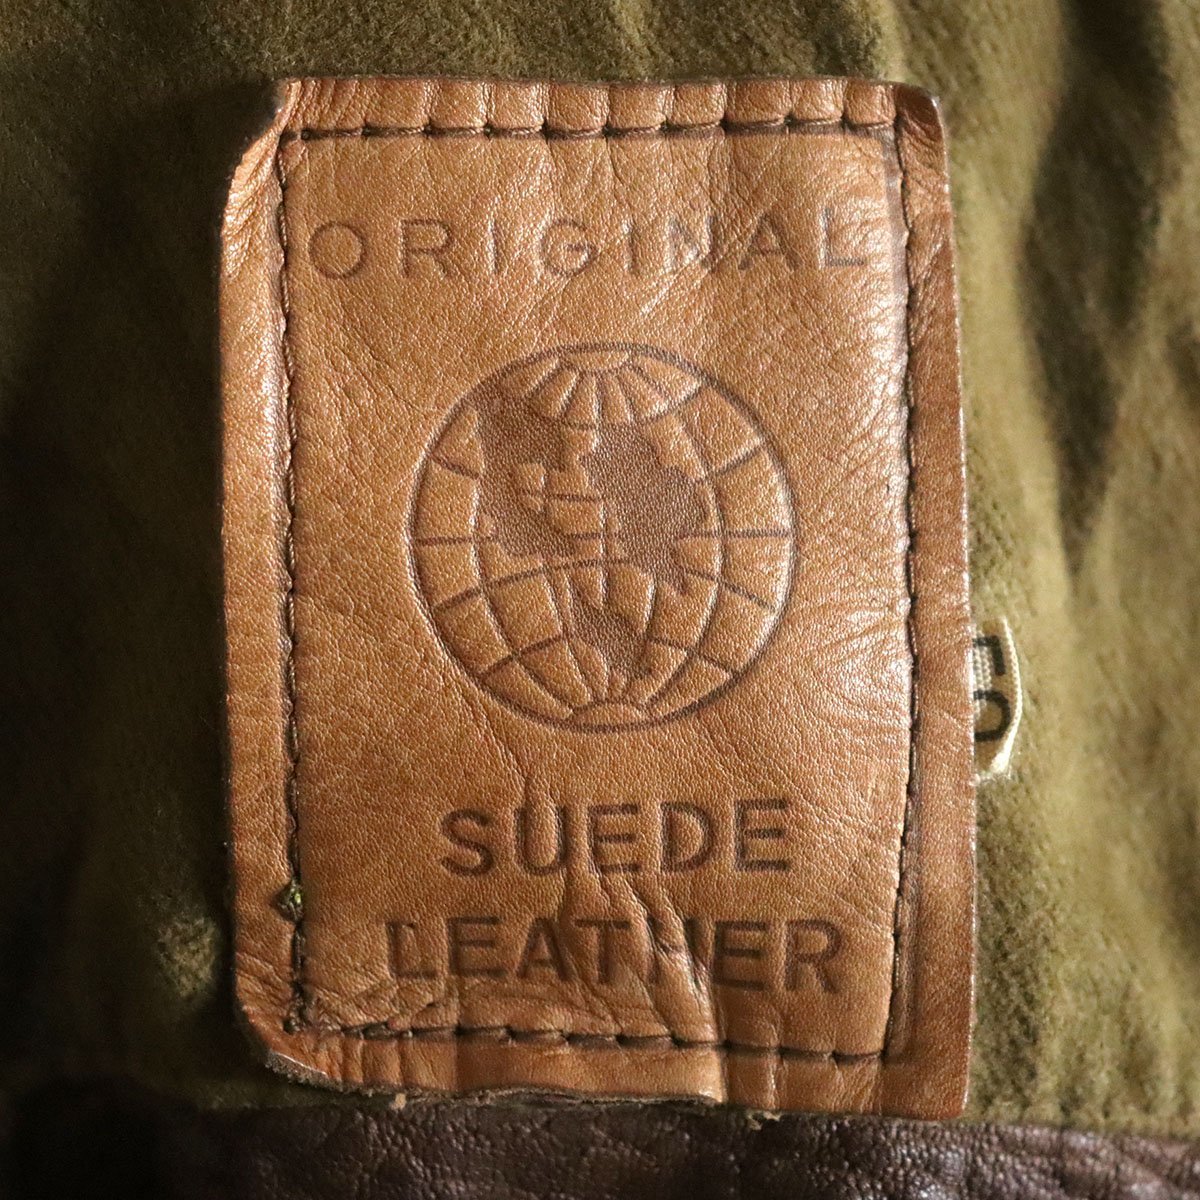 #1T/Y12.5-1　SUEDE LEATHER　襟ボア　レザーフライトジャケット　本革　レザージャケット　革ジャン　皮ジャン_画像5